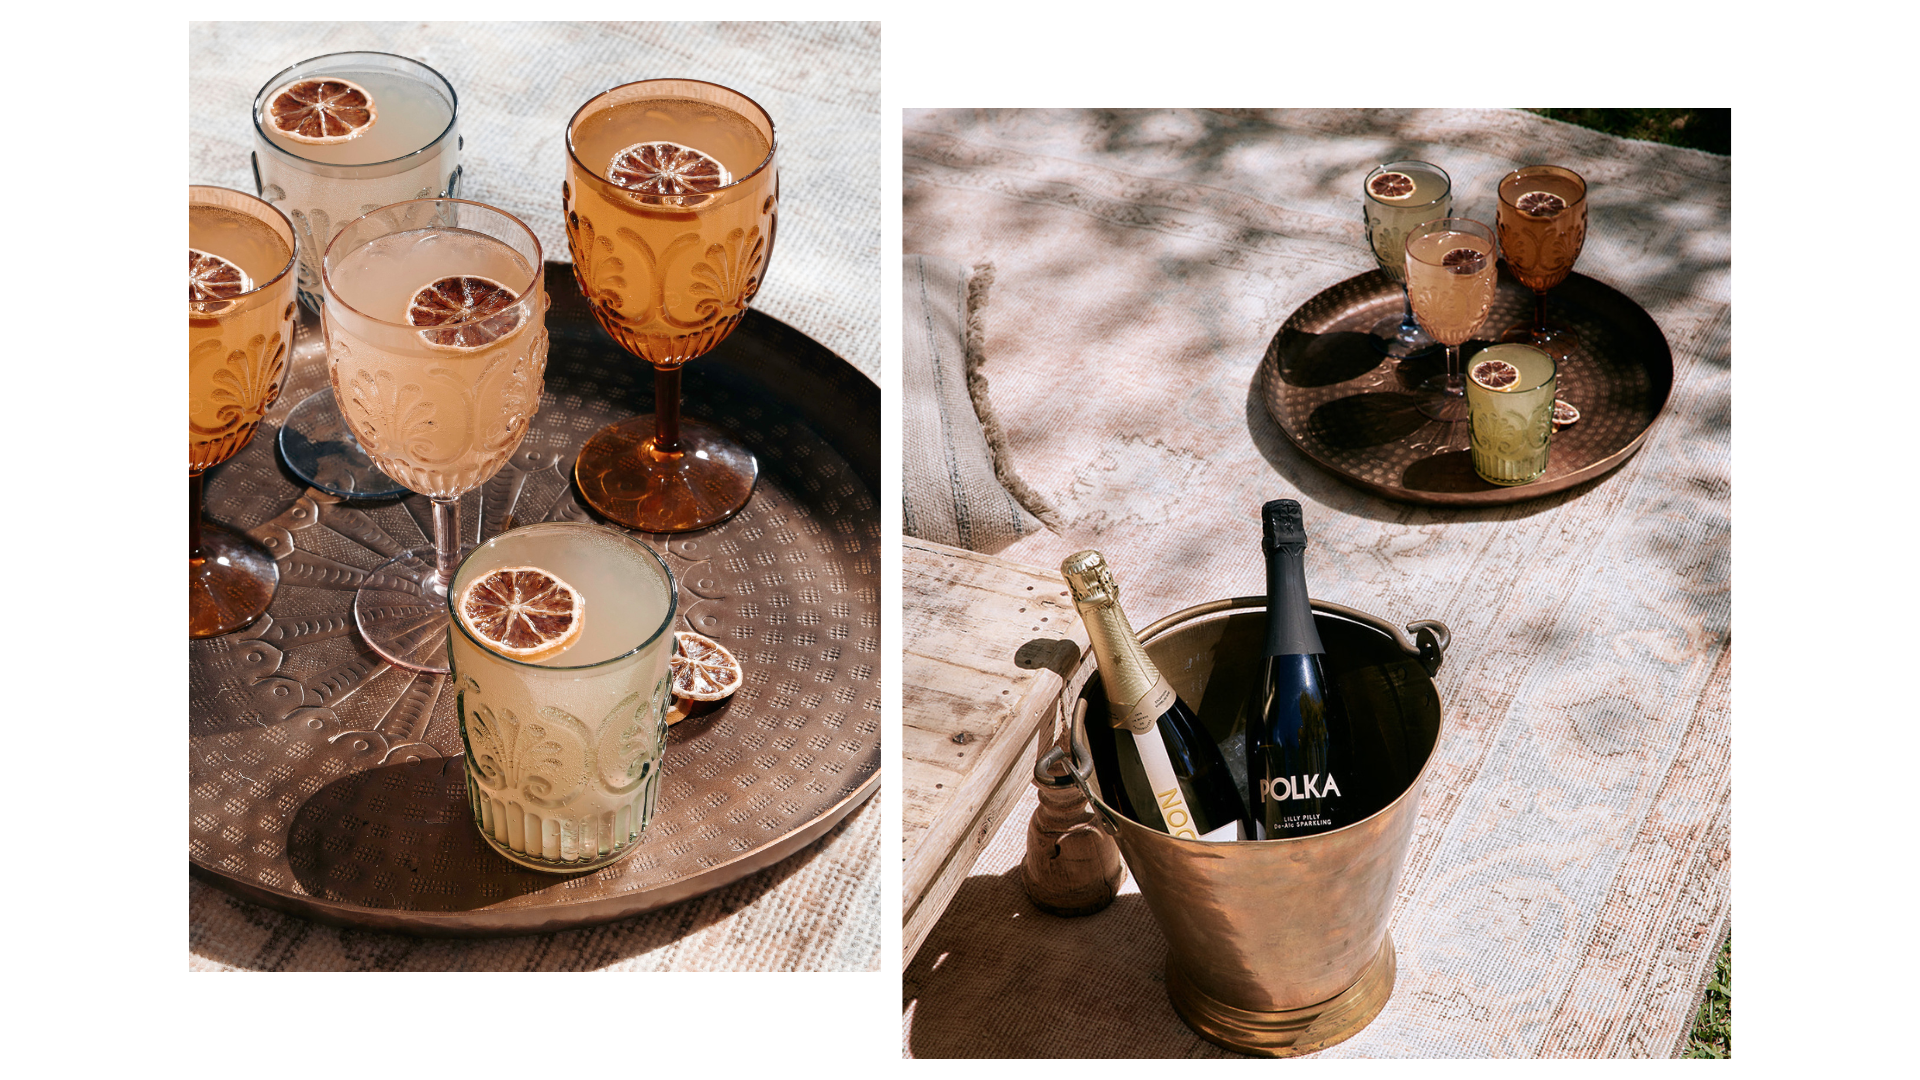 Acrylic outdoor wine glasses and brass antique wine bucket with bubbly for outdoor picnic